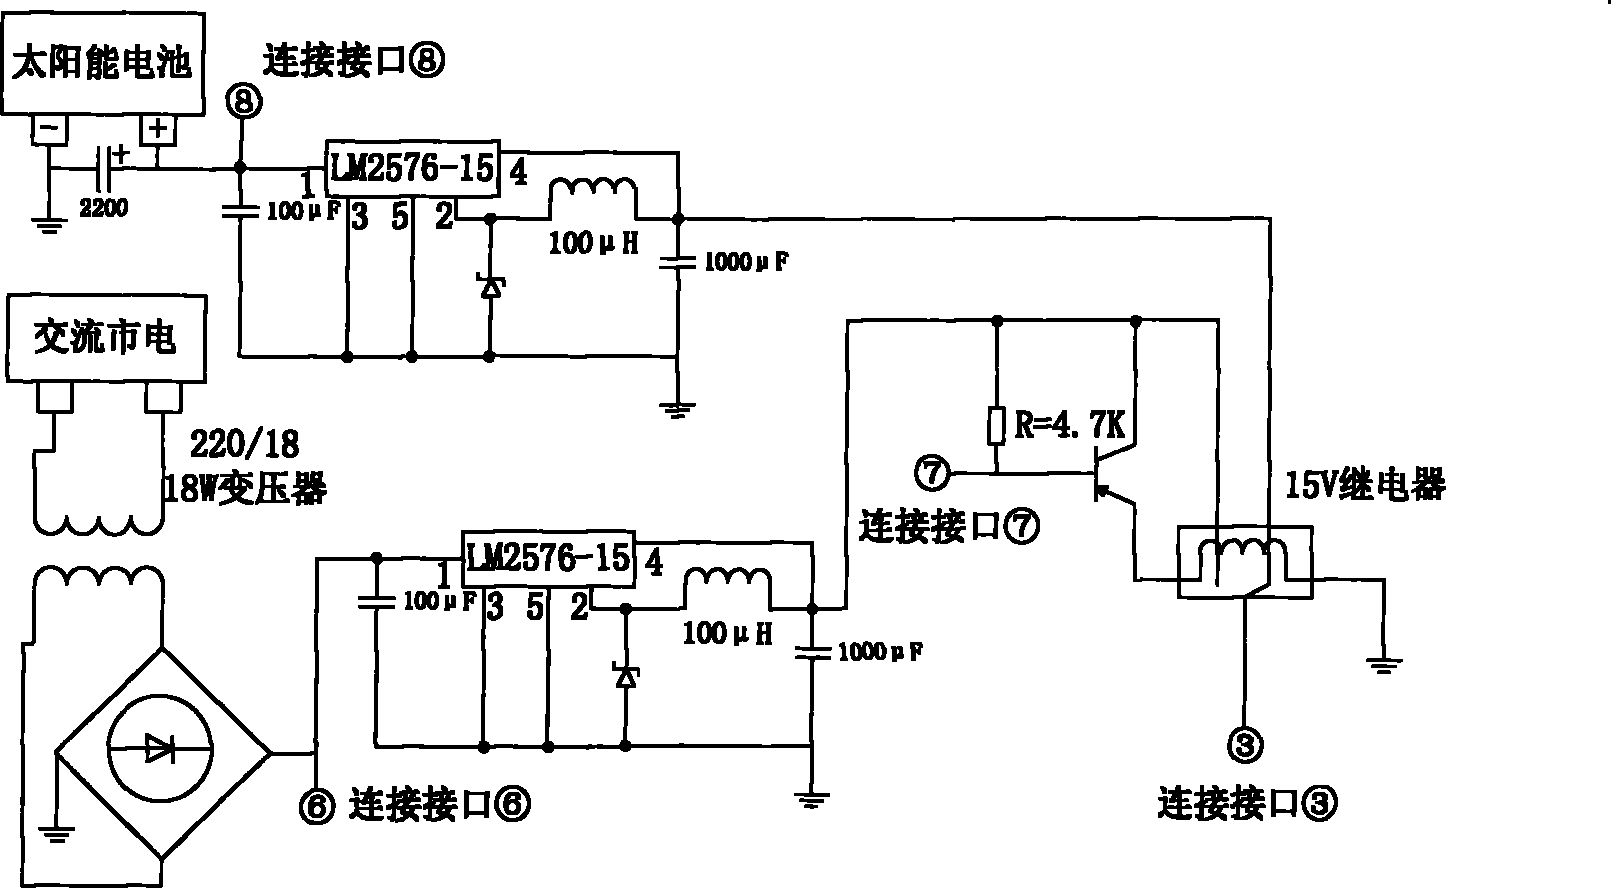 Compound power supply multi-level voltage output device and multi-power supply selection control method